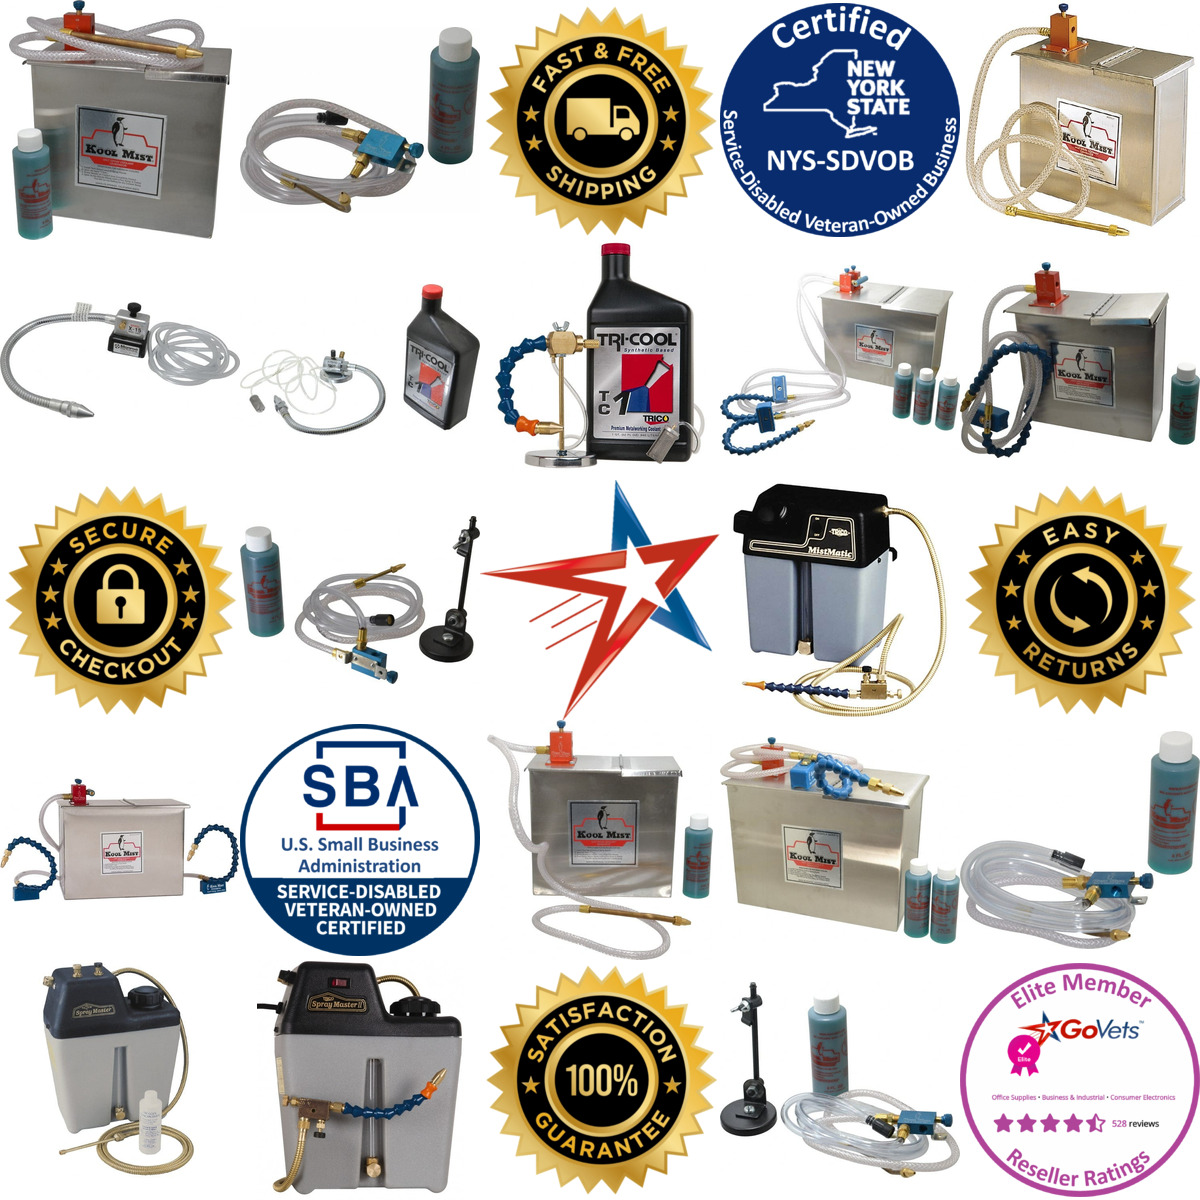 A selection of Mist Coolant Systems products on GoVets